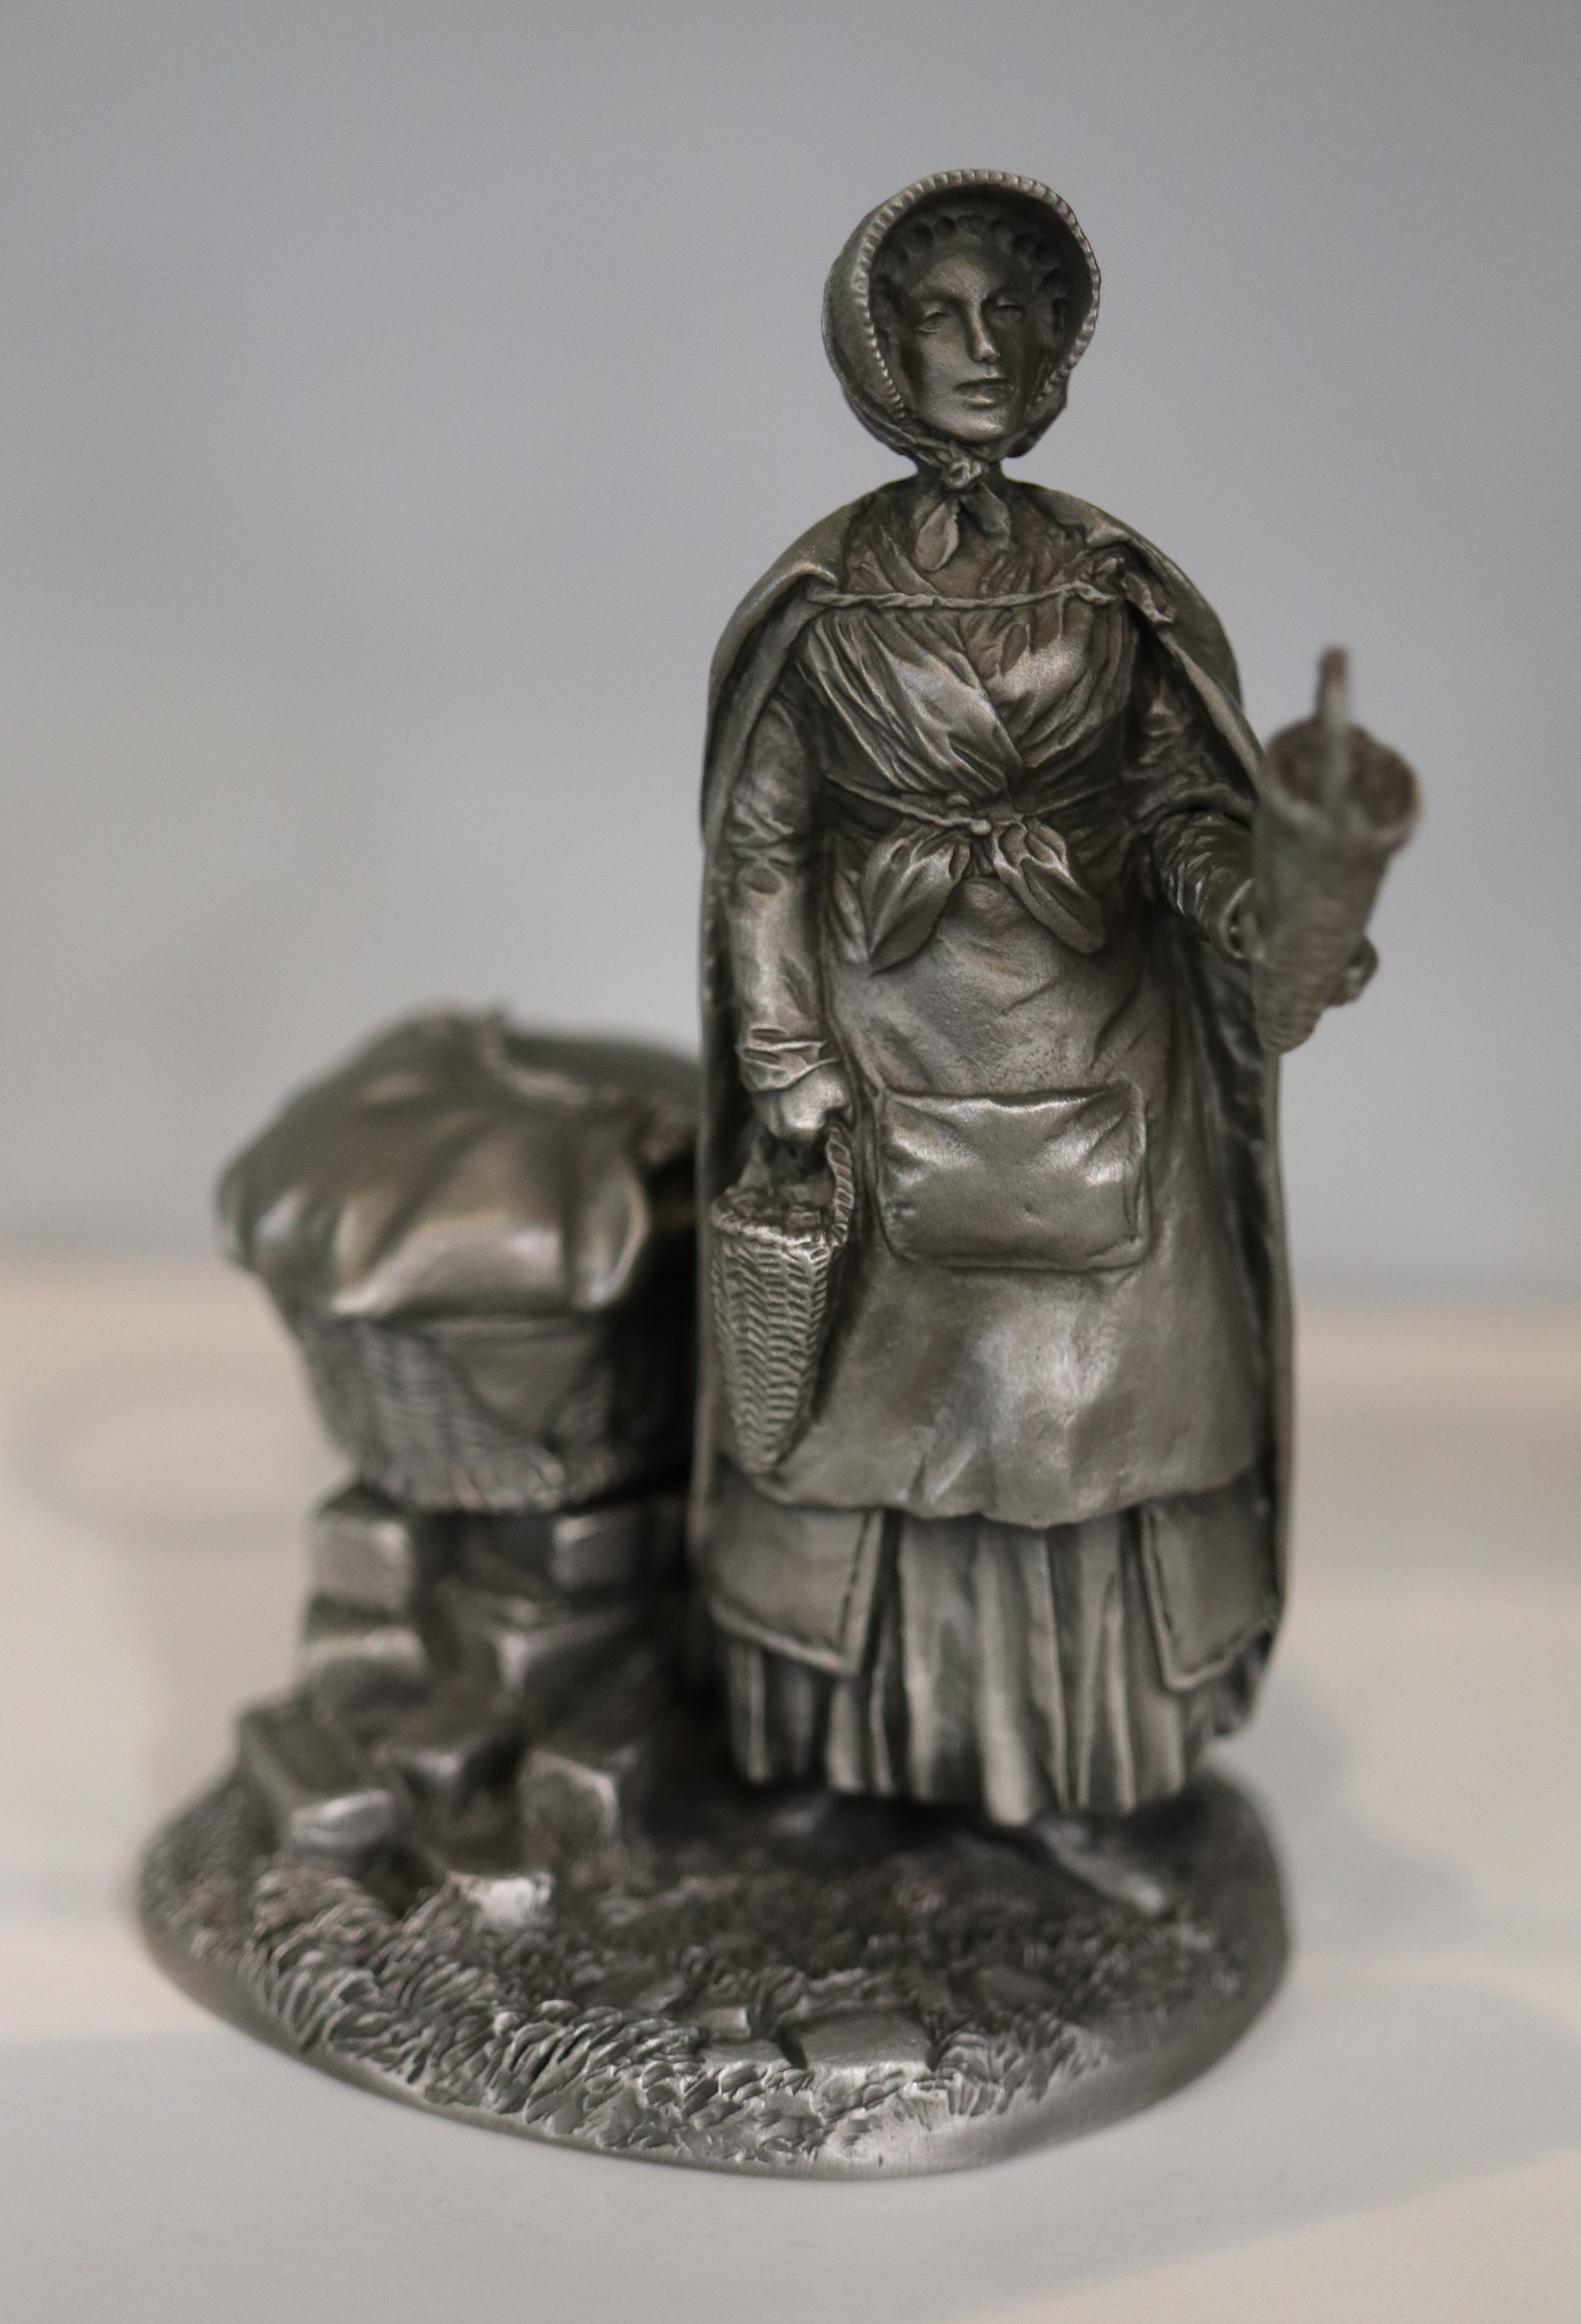 Complete collection of pewter figurines the Cries of London in original boxes - Image 6 of 13